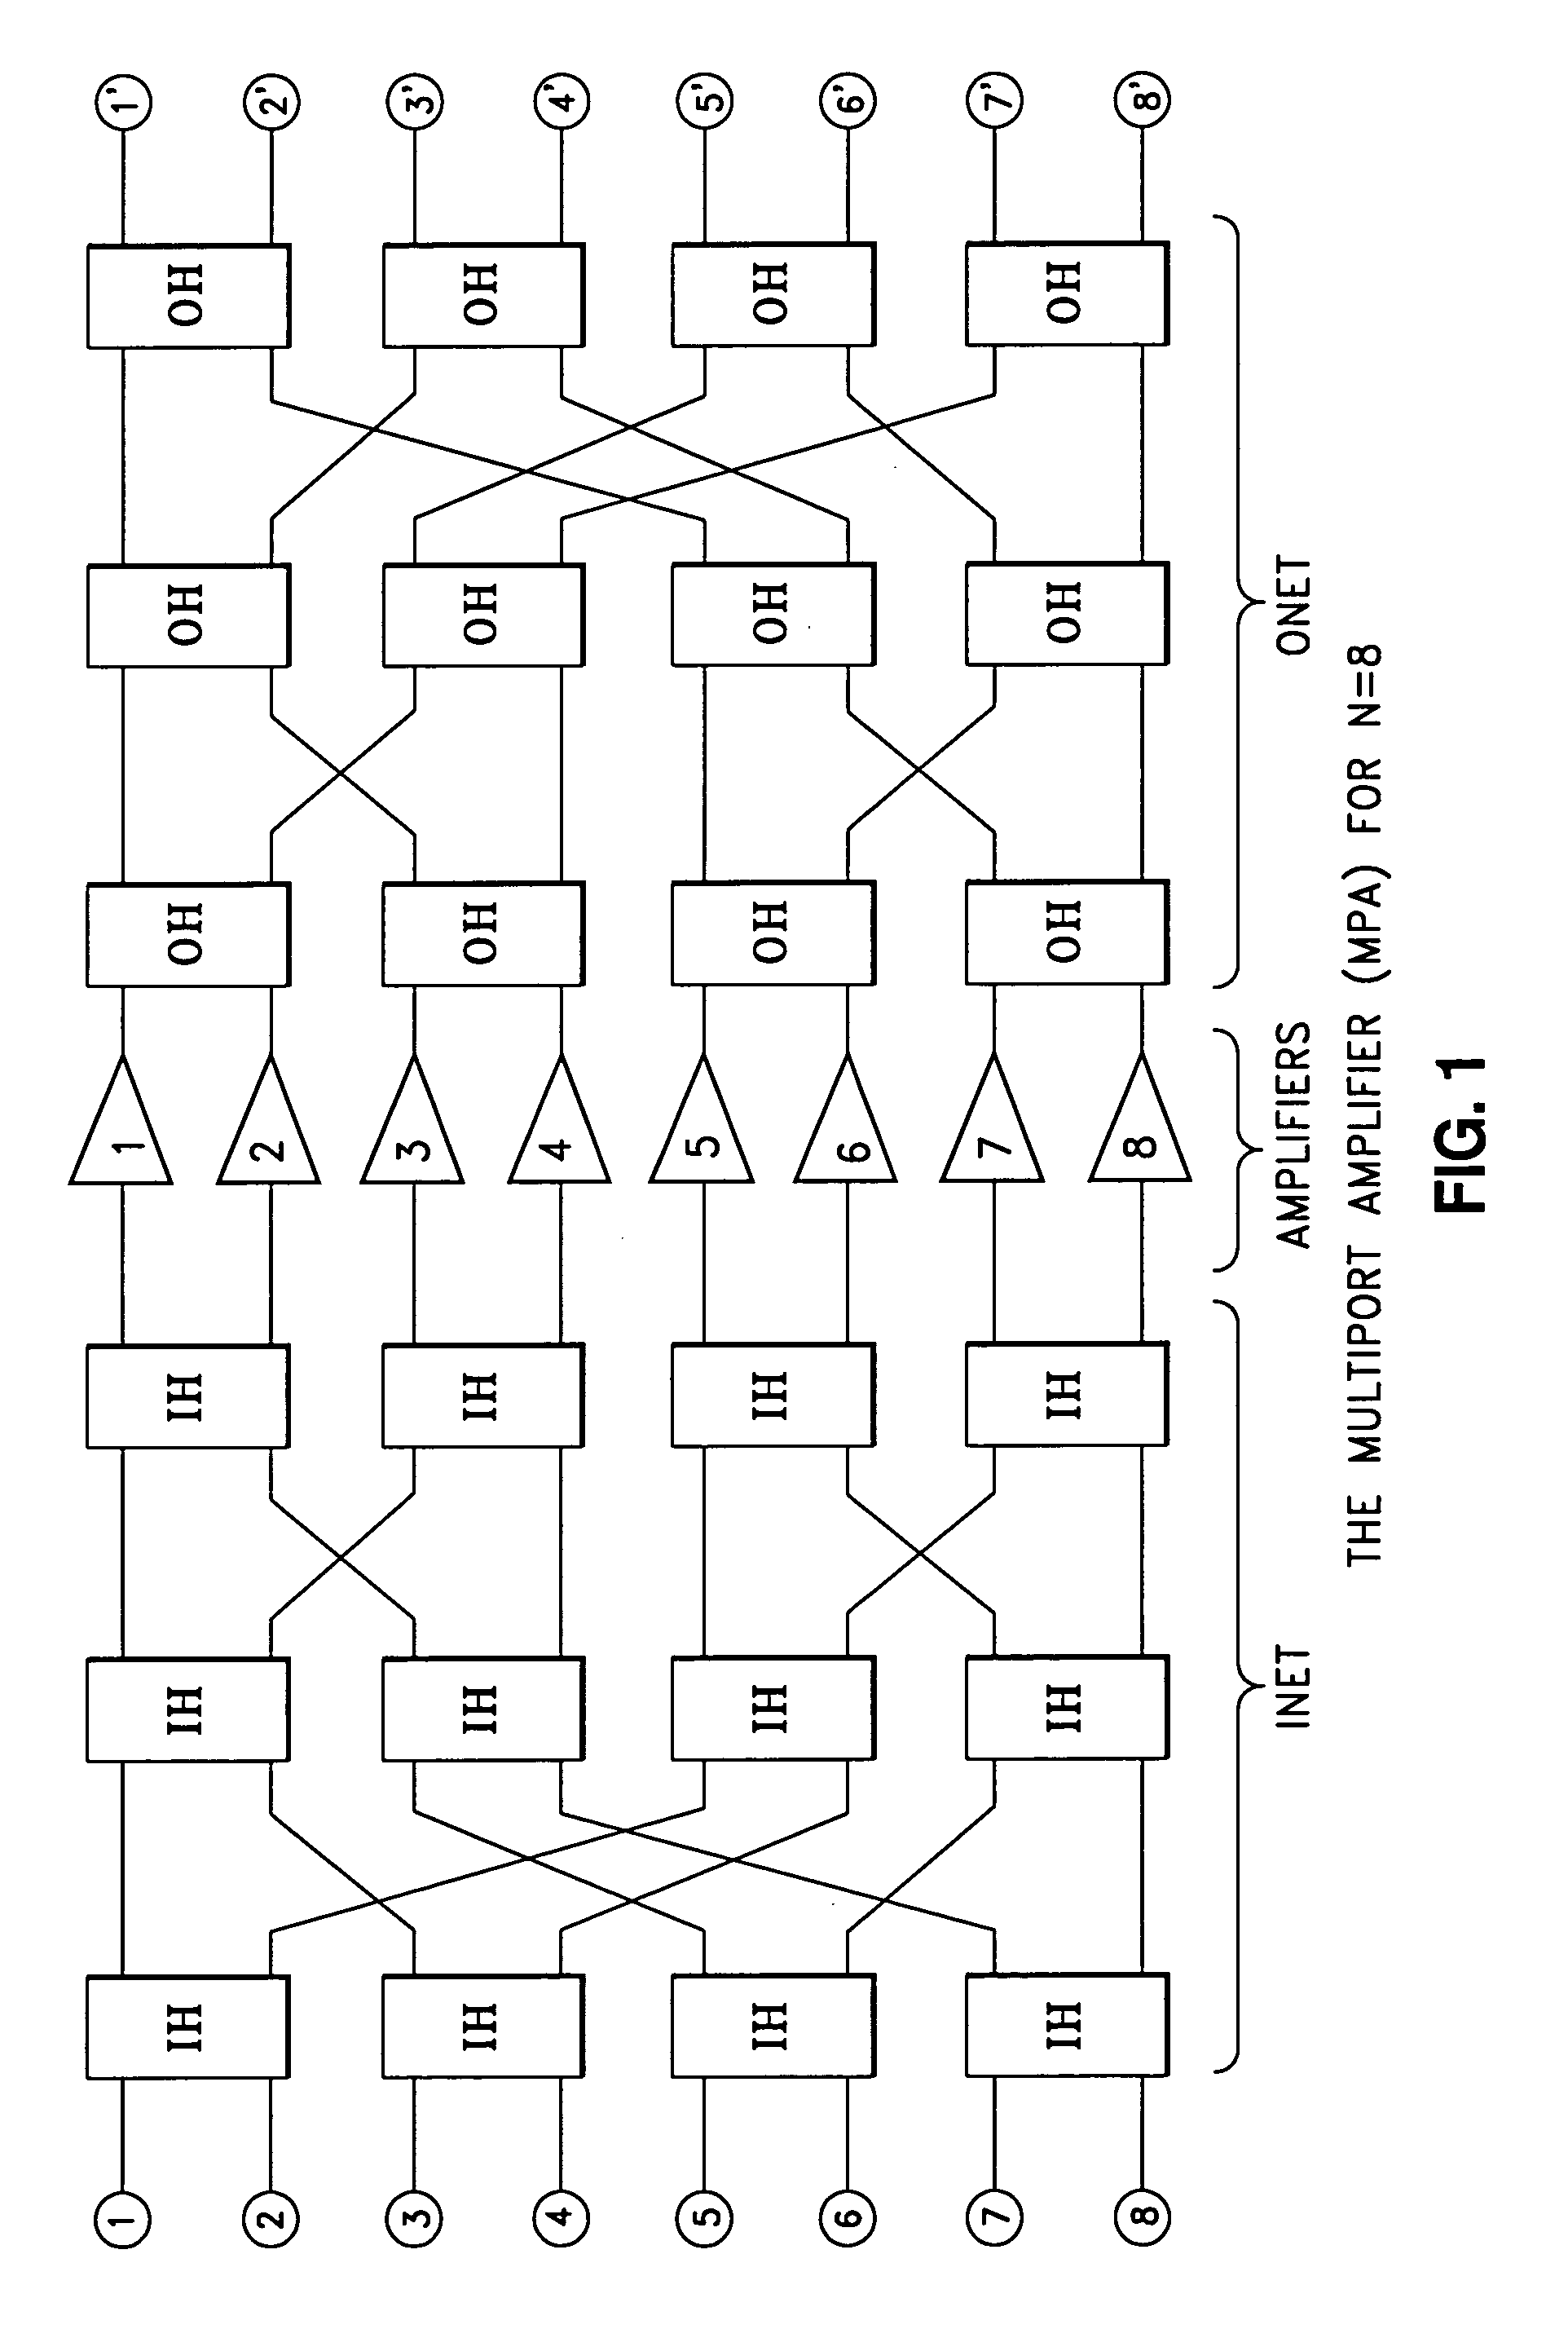 Adjustable multiport power/phase method and system with minimum phase error